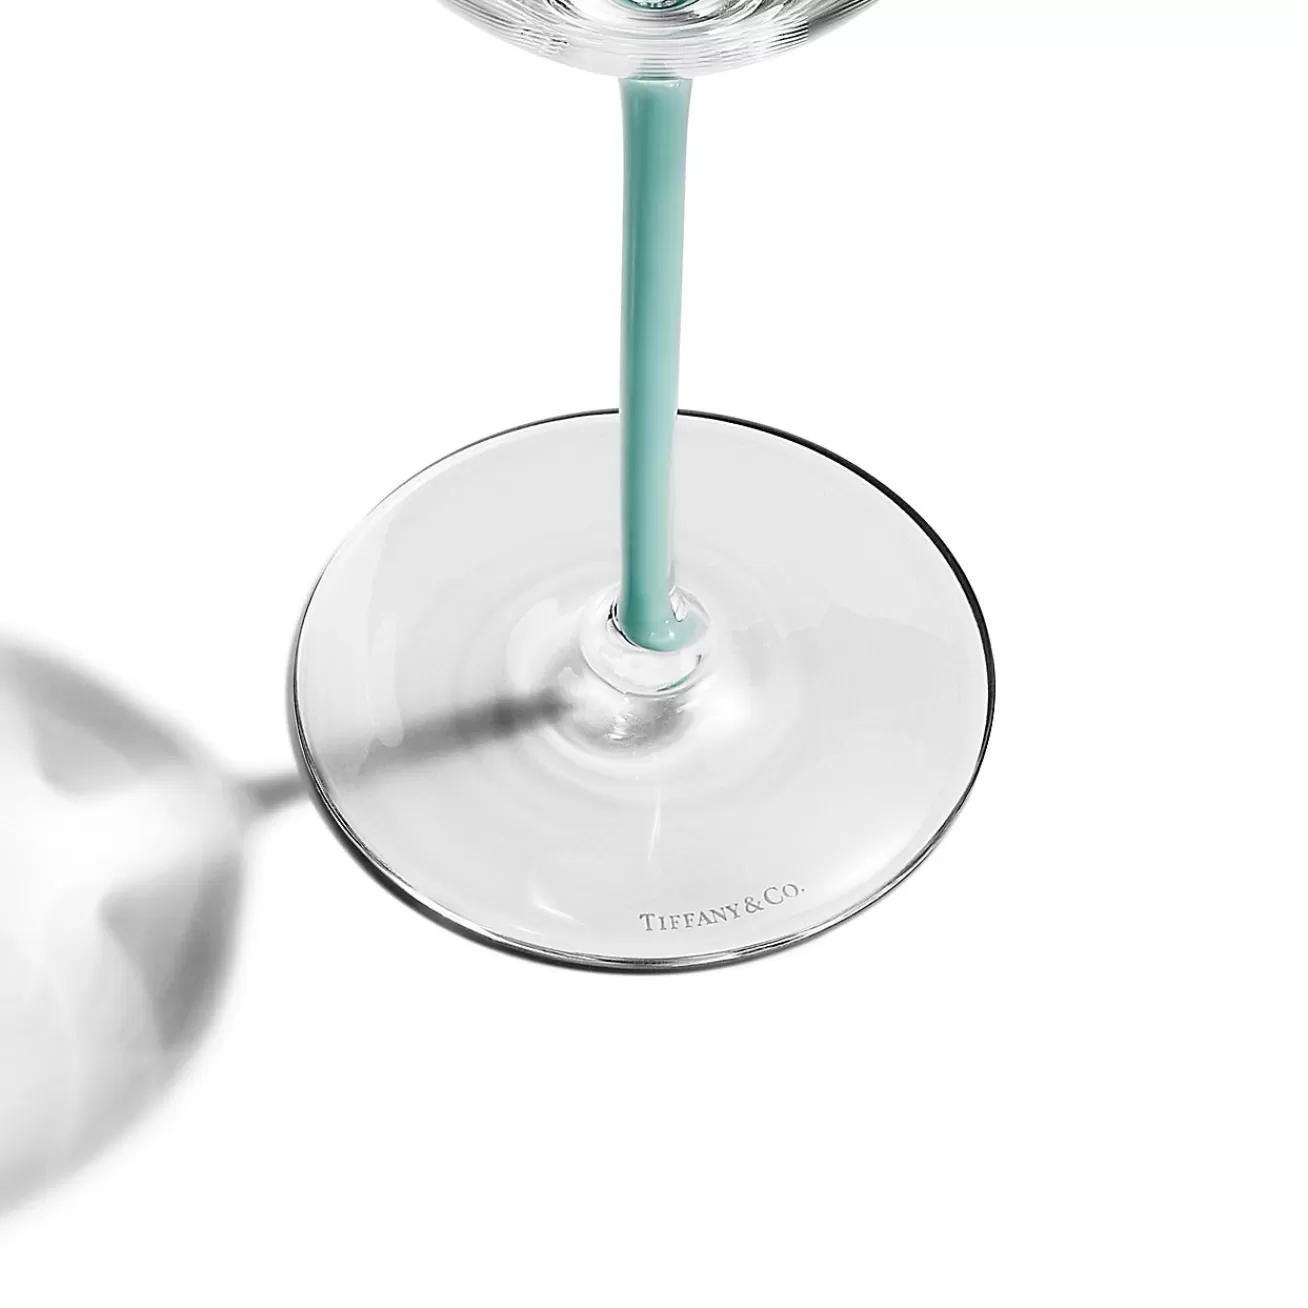 Tiffany & Co. Tiffany Home Essentials Champagne Glass in Crystal Glass | ^ The Home | Housewarming Gifts